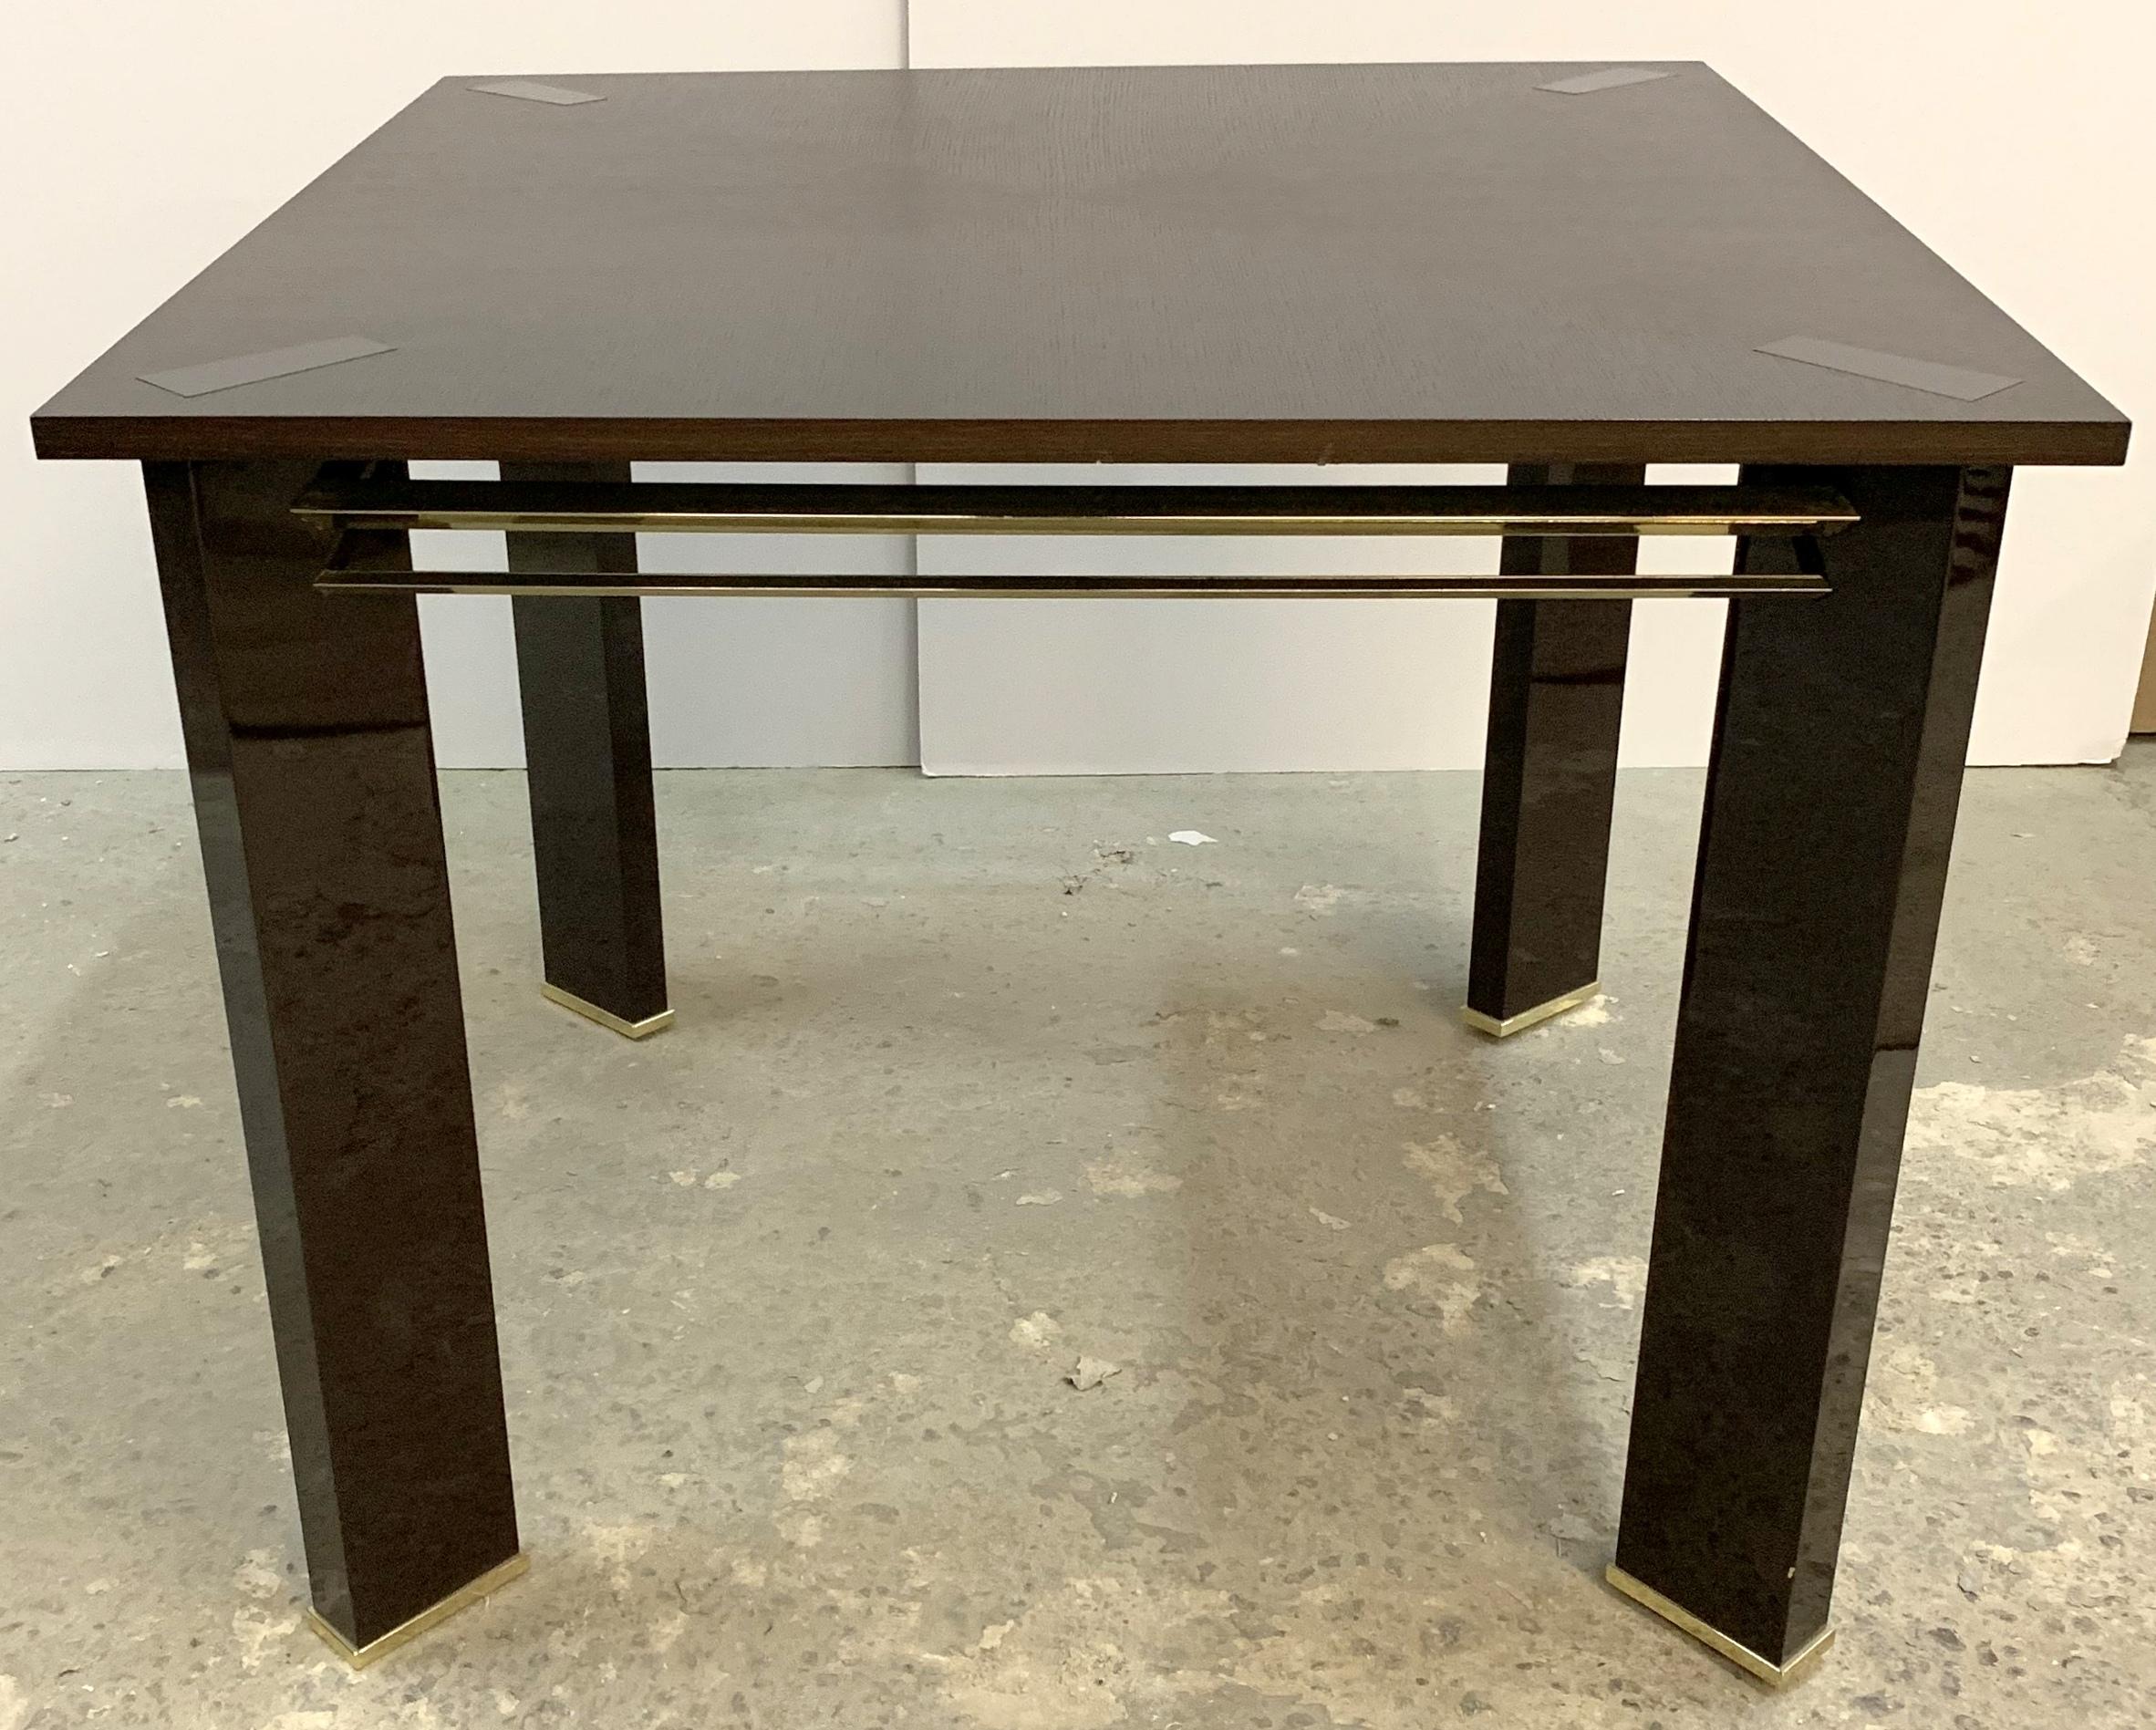 A wonderful Mid-Century Modern ashwood and brown lacquered game table with polished bronze finishes
Purchased from Lorin Marsh.